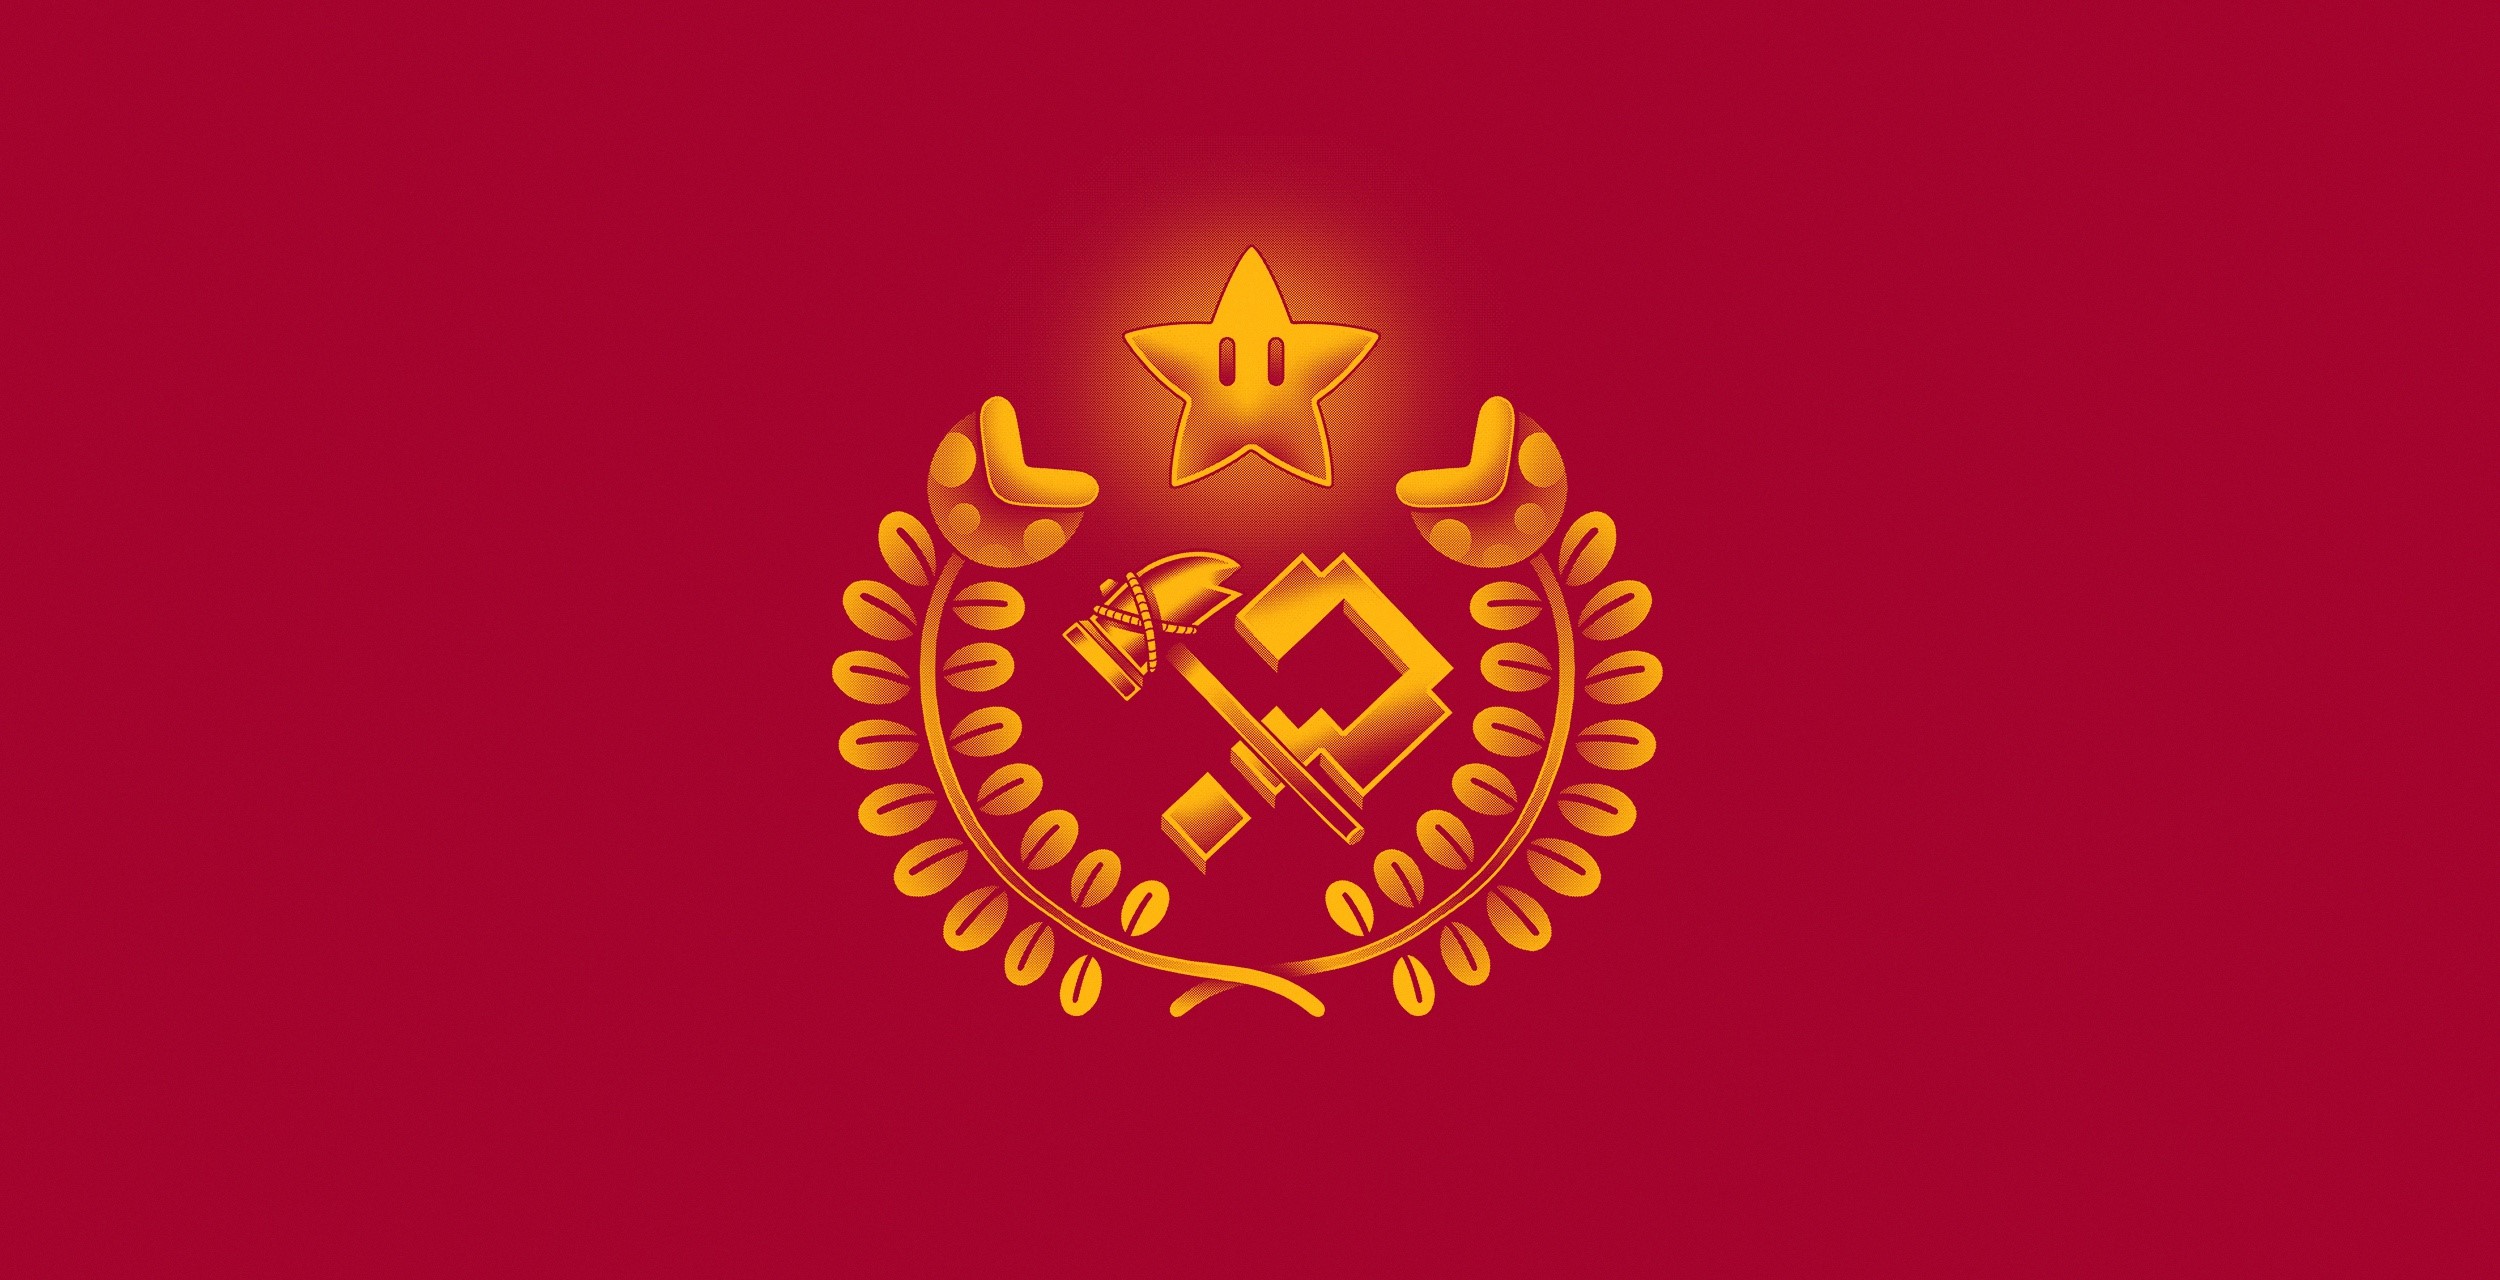 HD Wallpaper for theme: hammer and sickle HD wallpaper, background